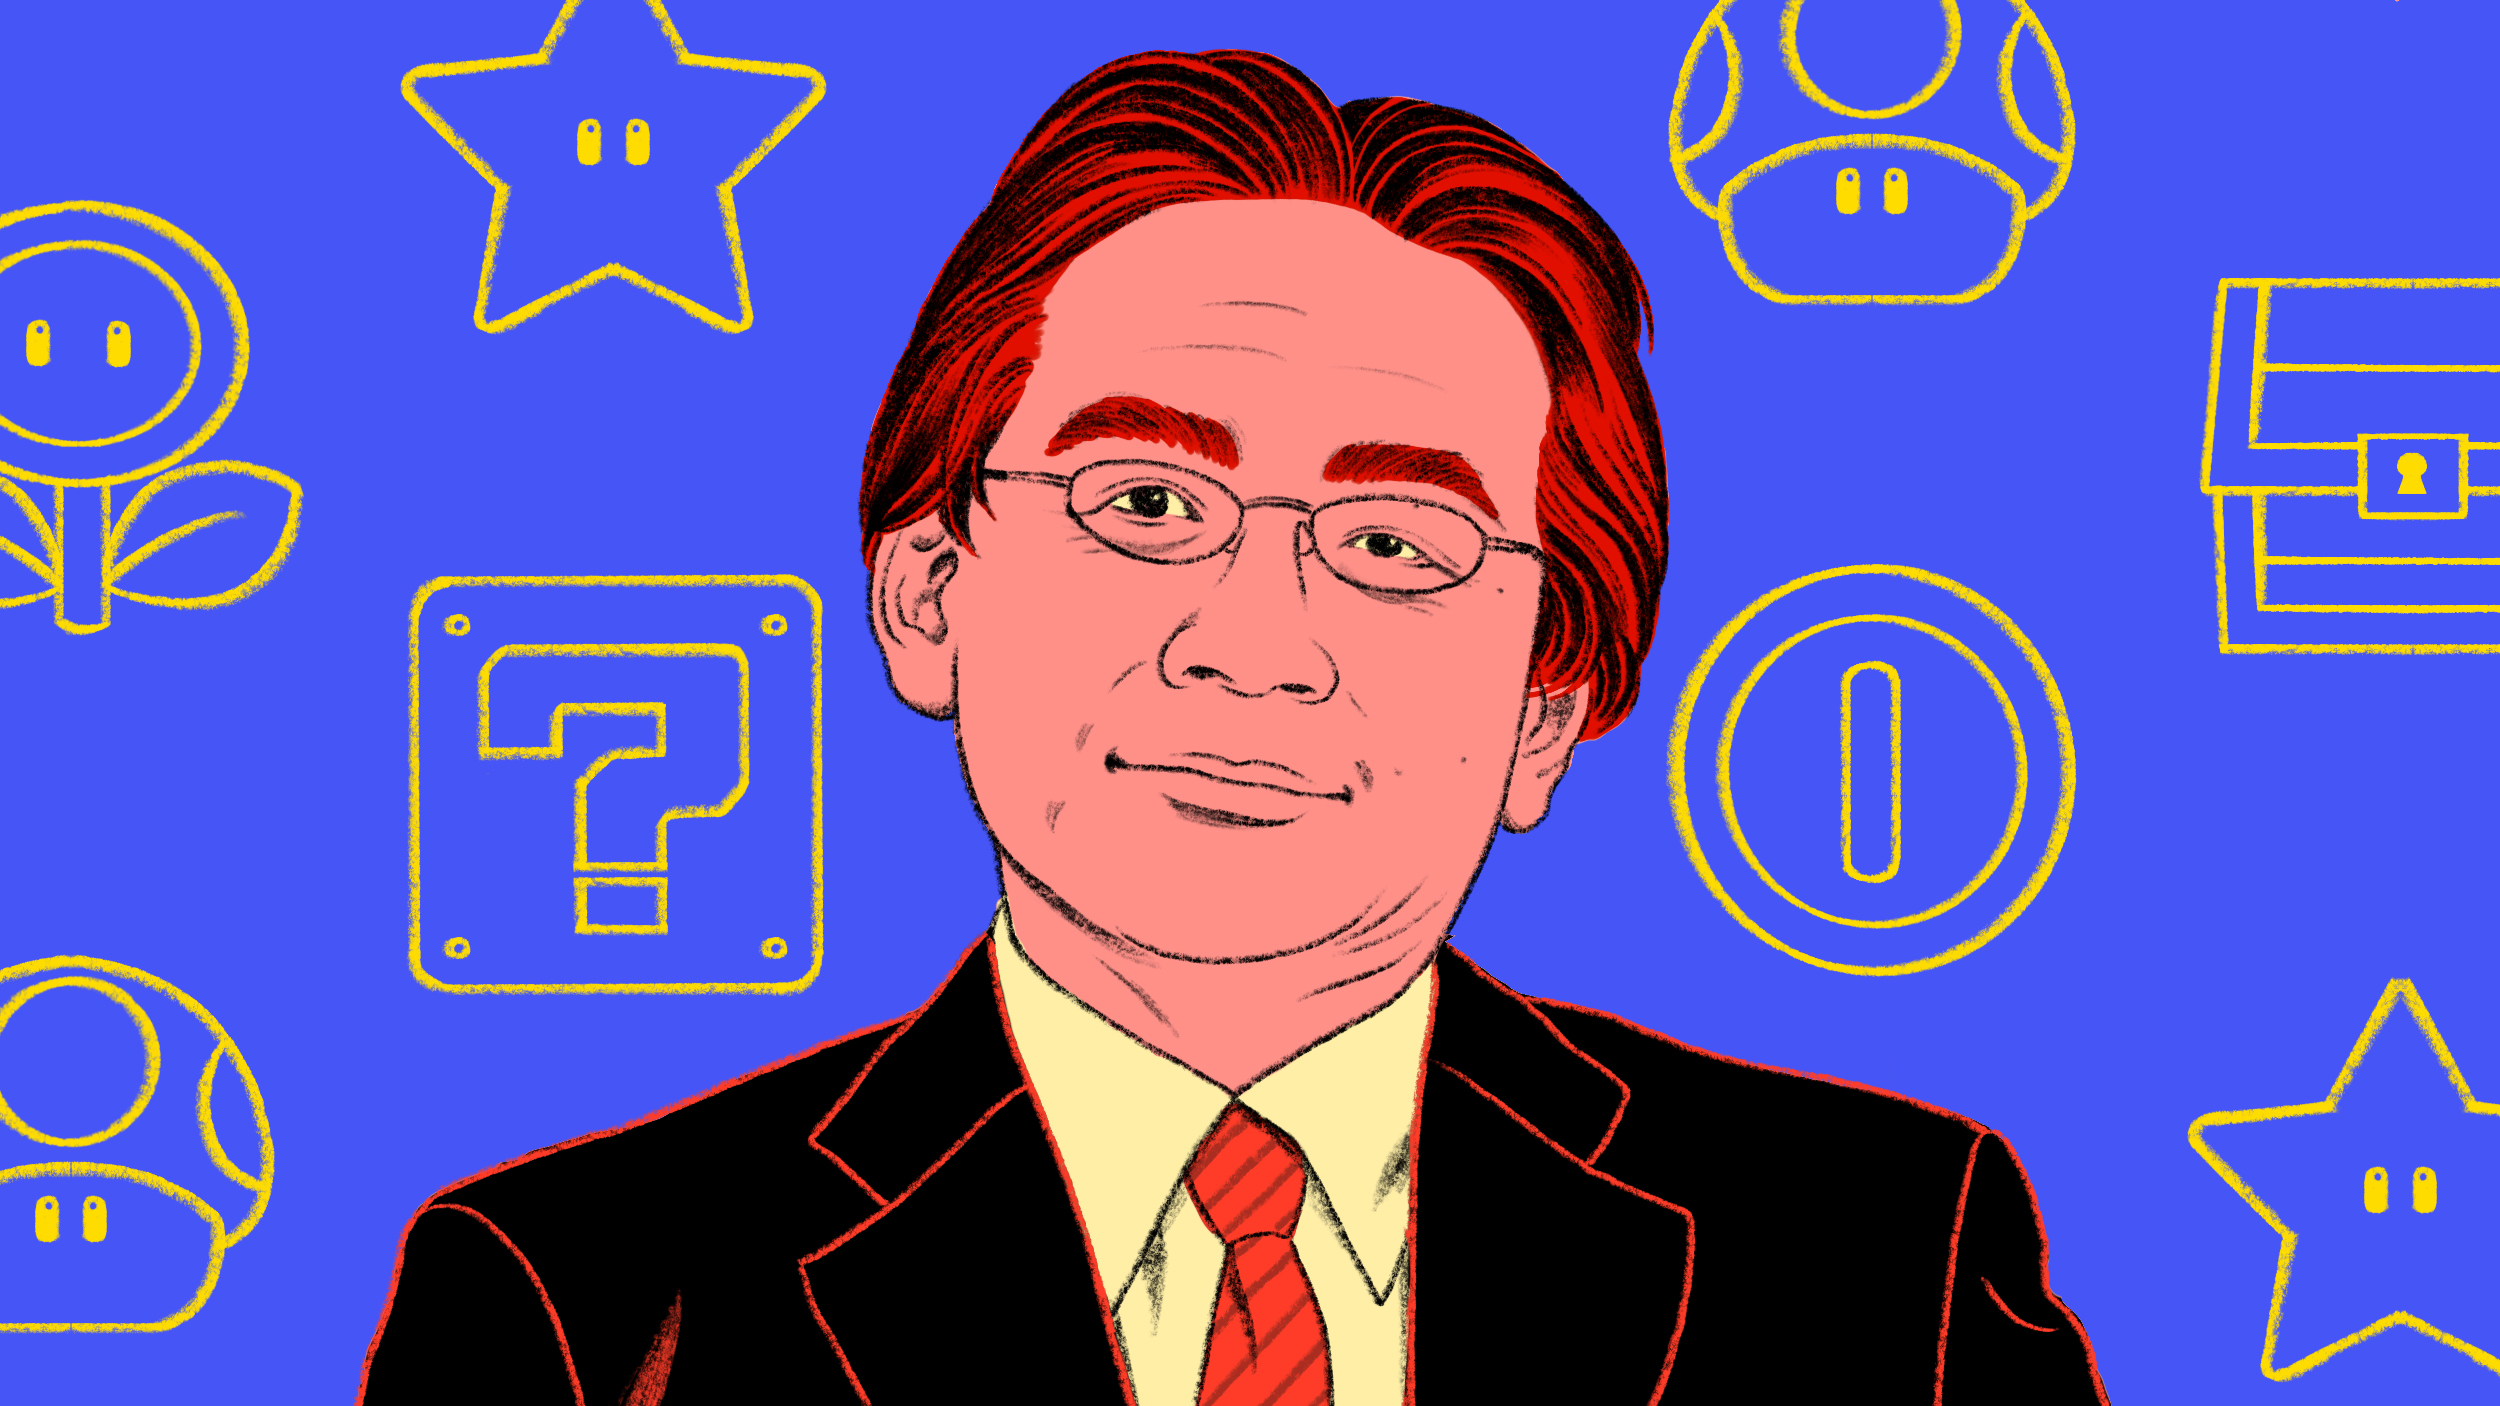 An image of Satoru Iwata, the leader in a suit and tie, surrounded by Nintendo icons.